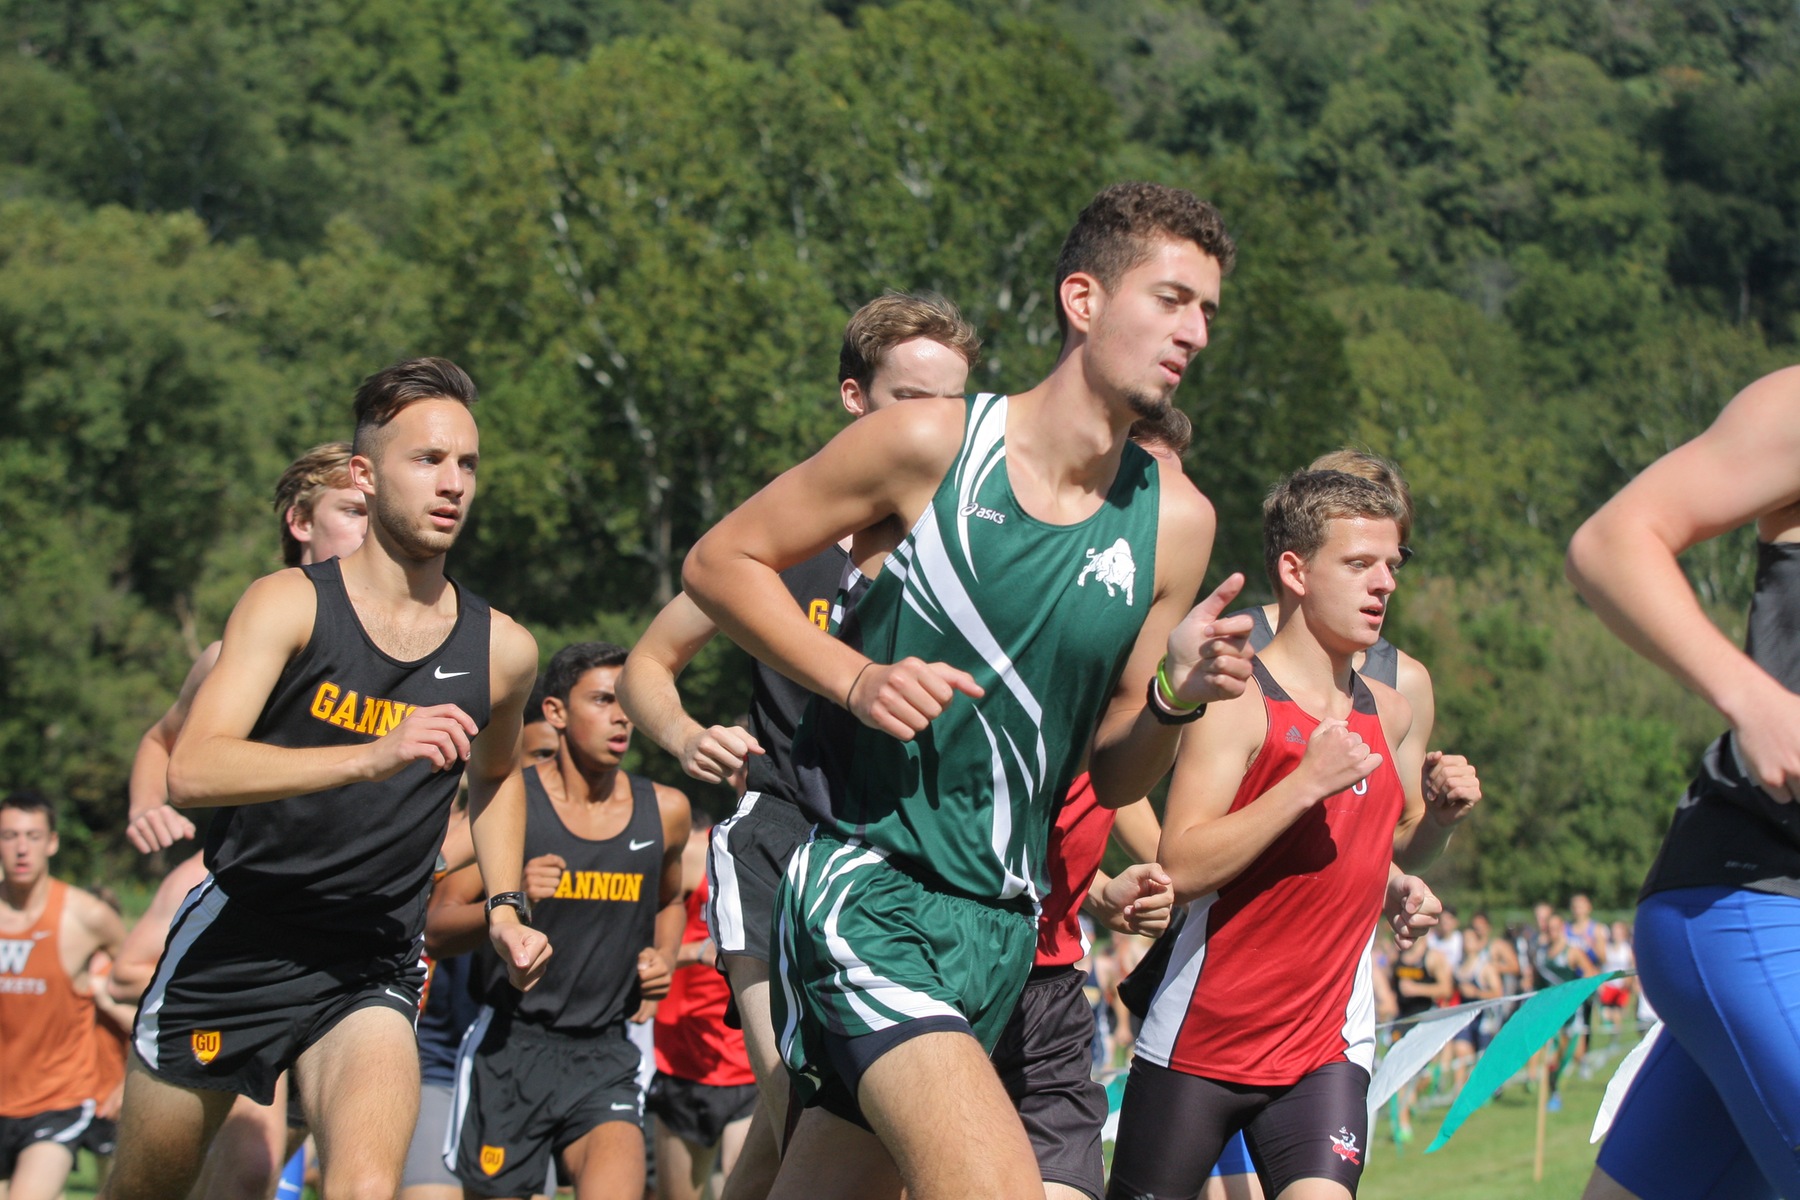 Bison run at NCAA Division III Mideast Regional Championships